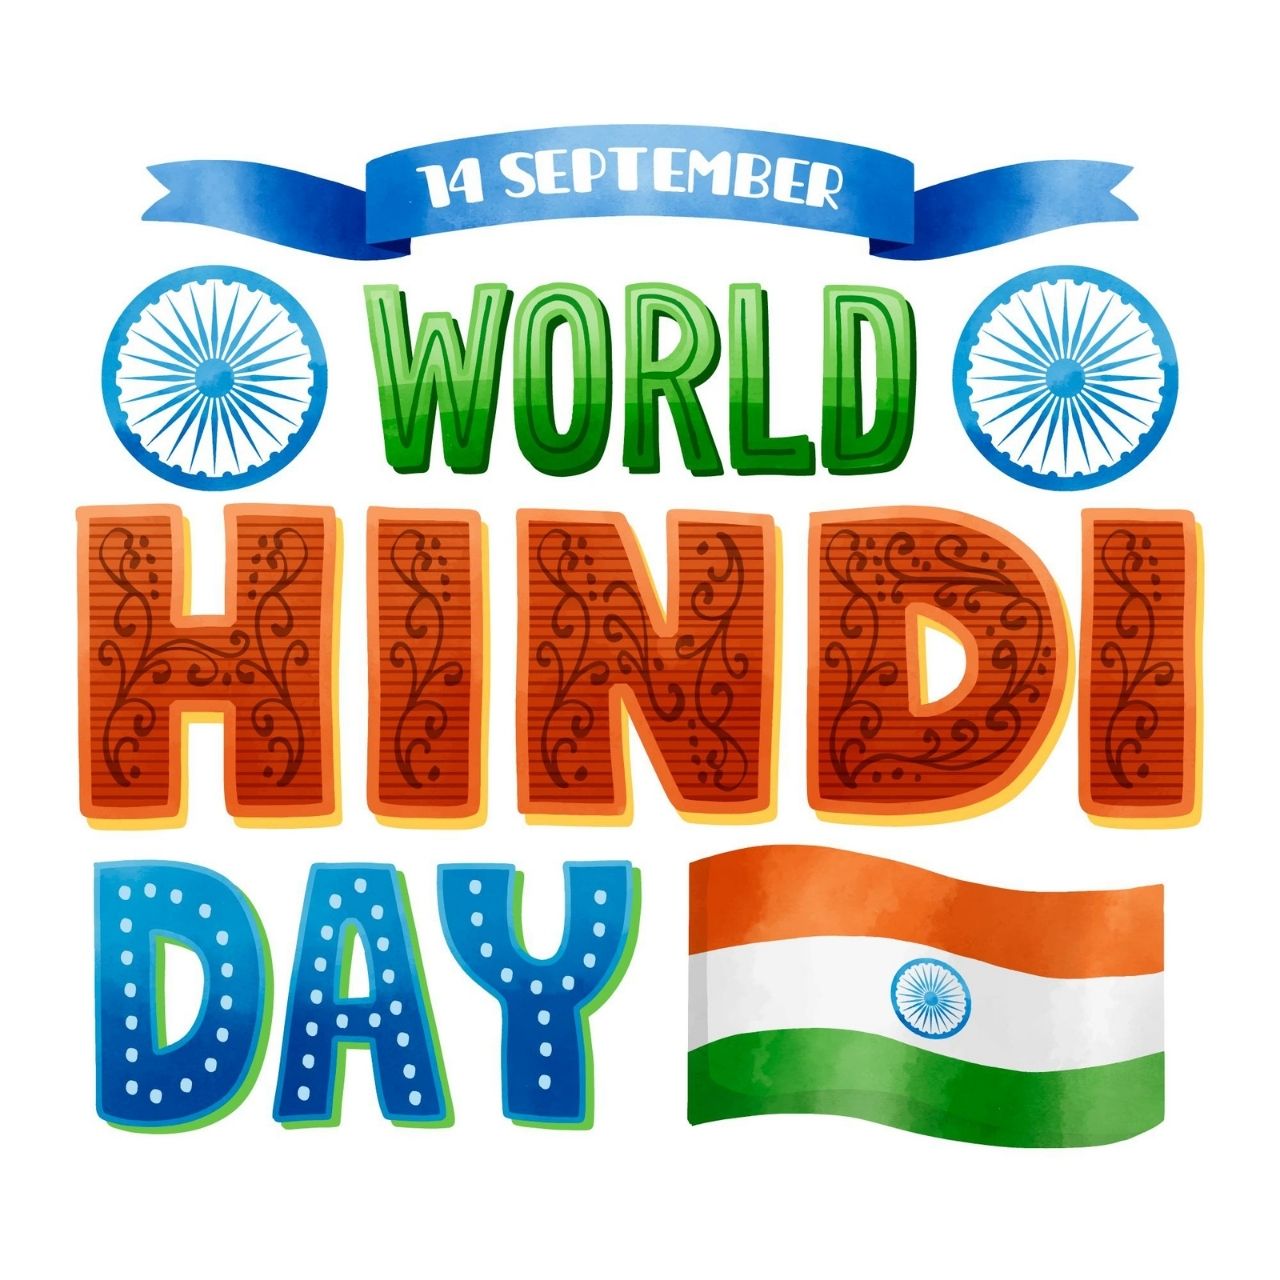 Happy World Hindi Day 2021 Wishes, Quotes, HD Images, Messages, and Greetings to celebrate your Mother Language Day